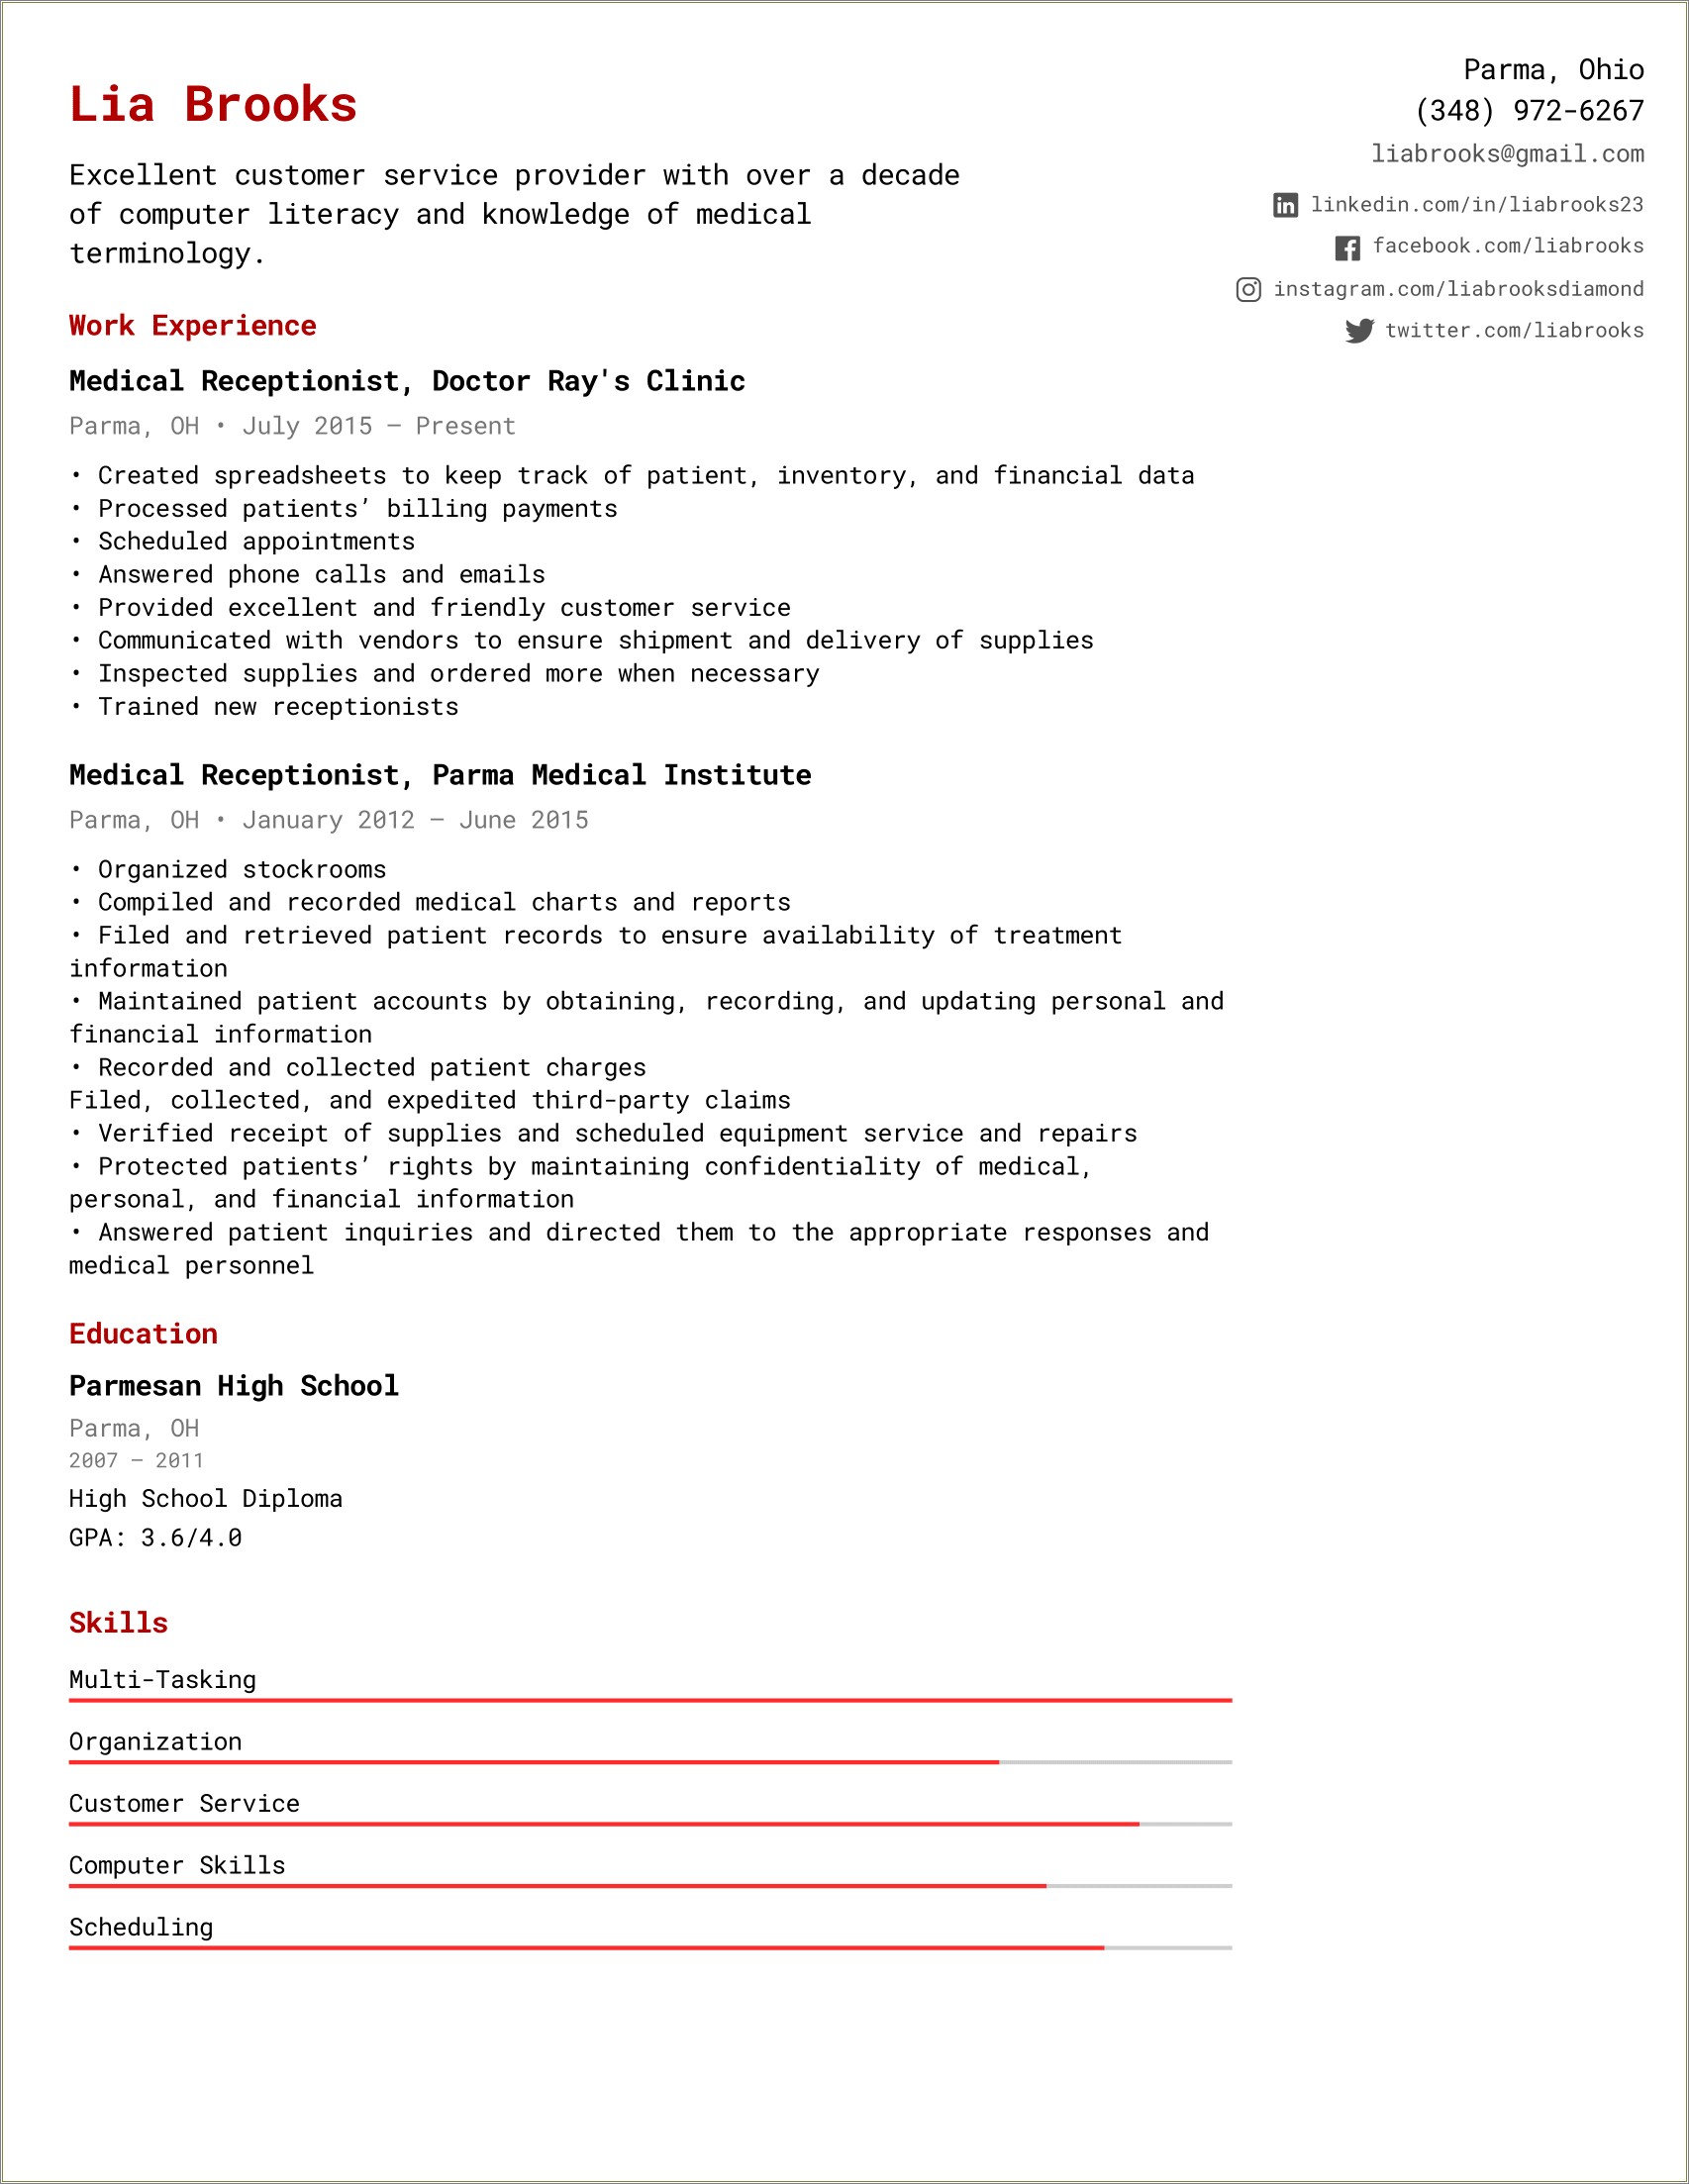 Resumes Of People Looking For Receptionist Work